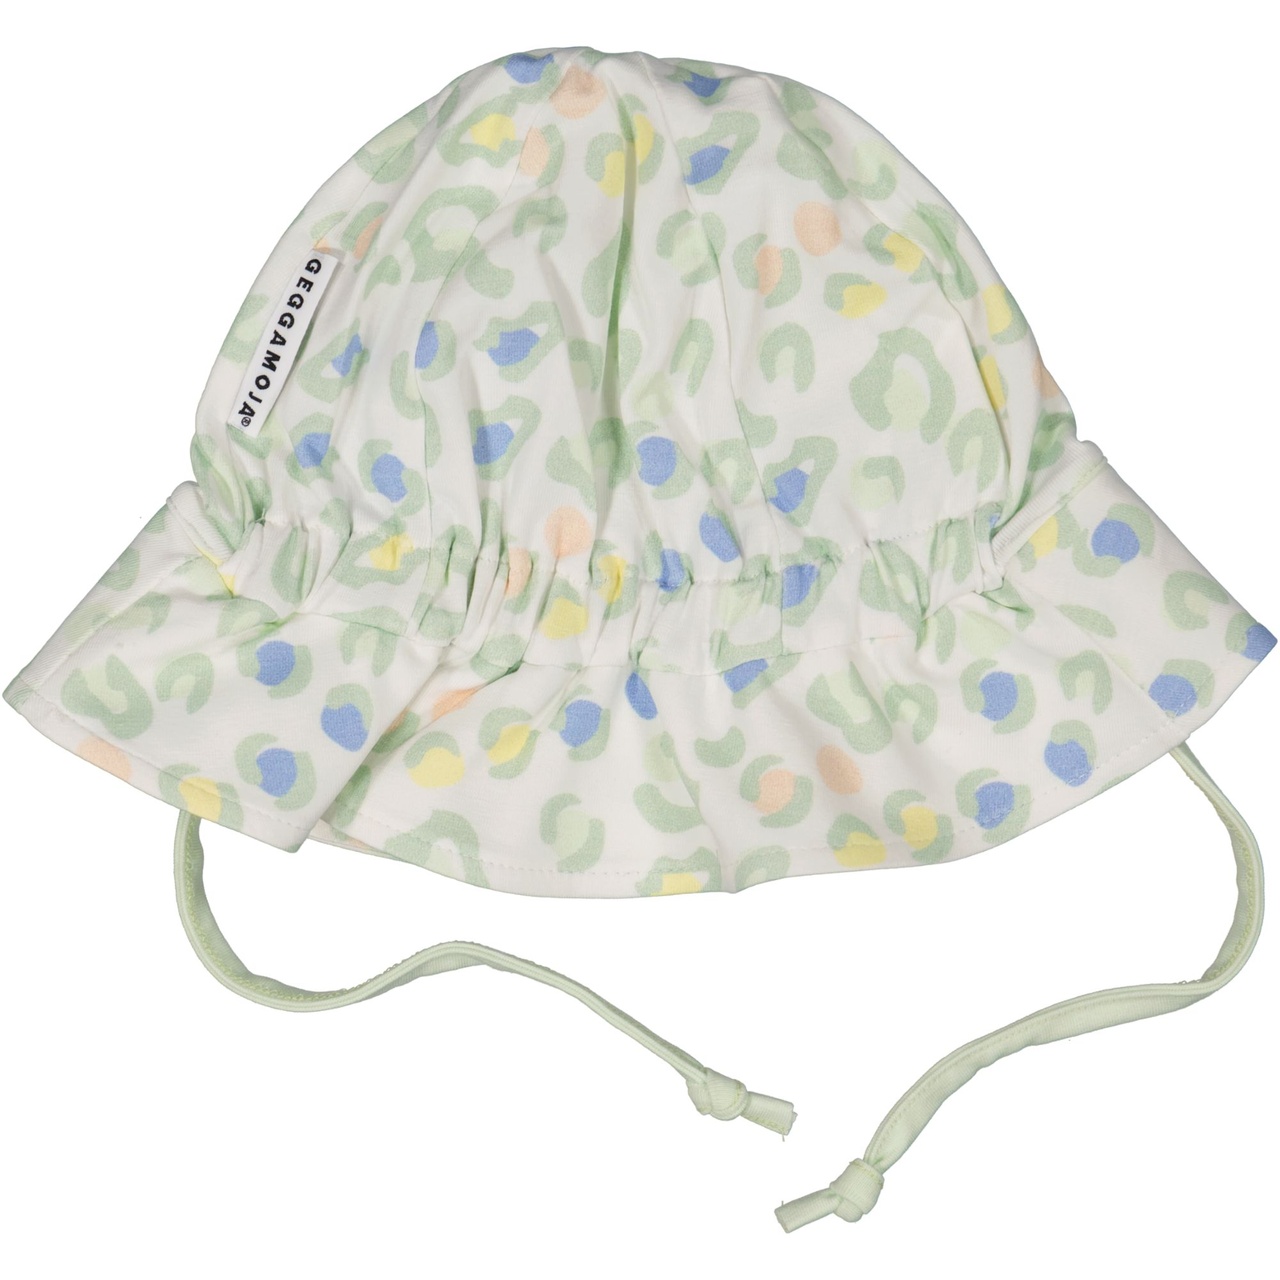 Bamboo Sunny hat Leo colored 01 2-6Y